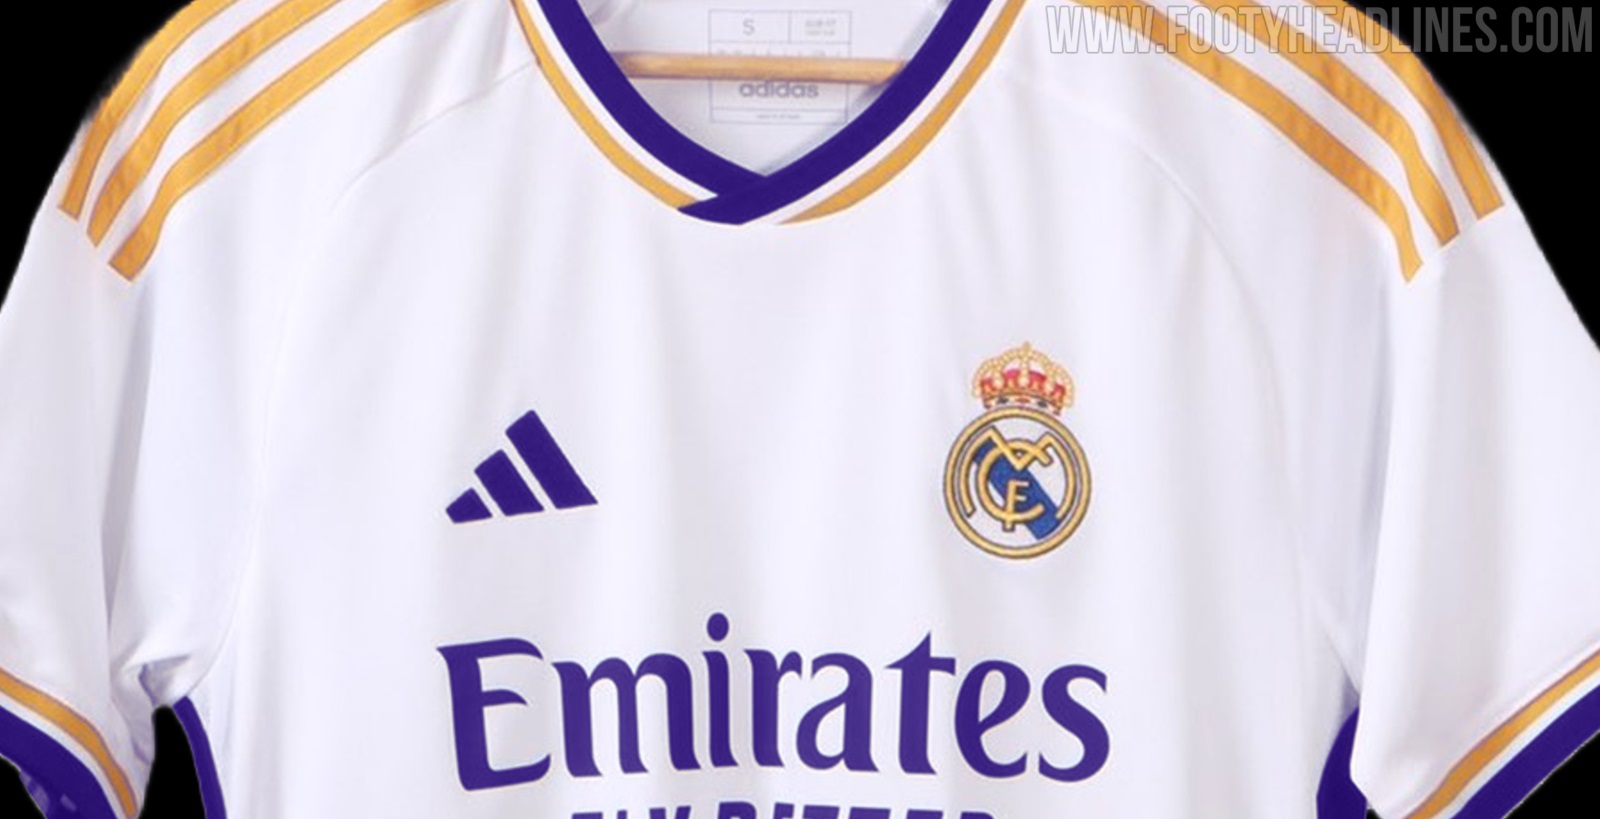 Footy Headlines leaks Real Madrid's home kit for the 2023-2024